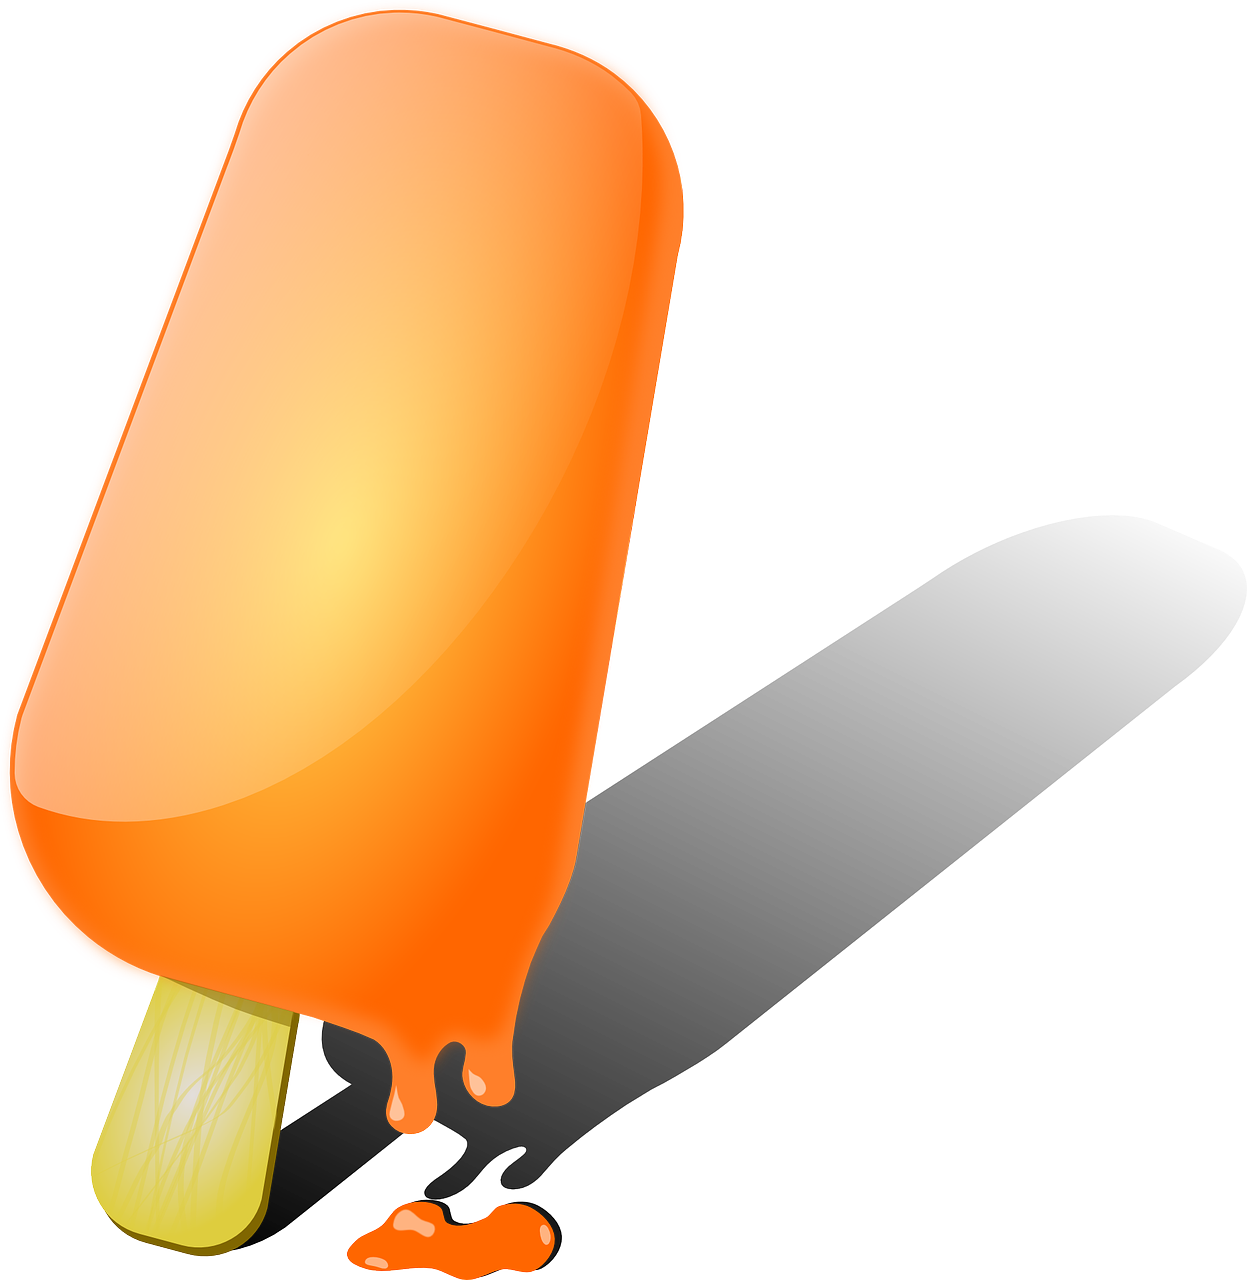 Frozen clipart national siblings day. Creamsicle whatever